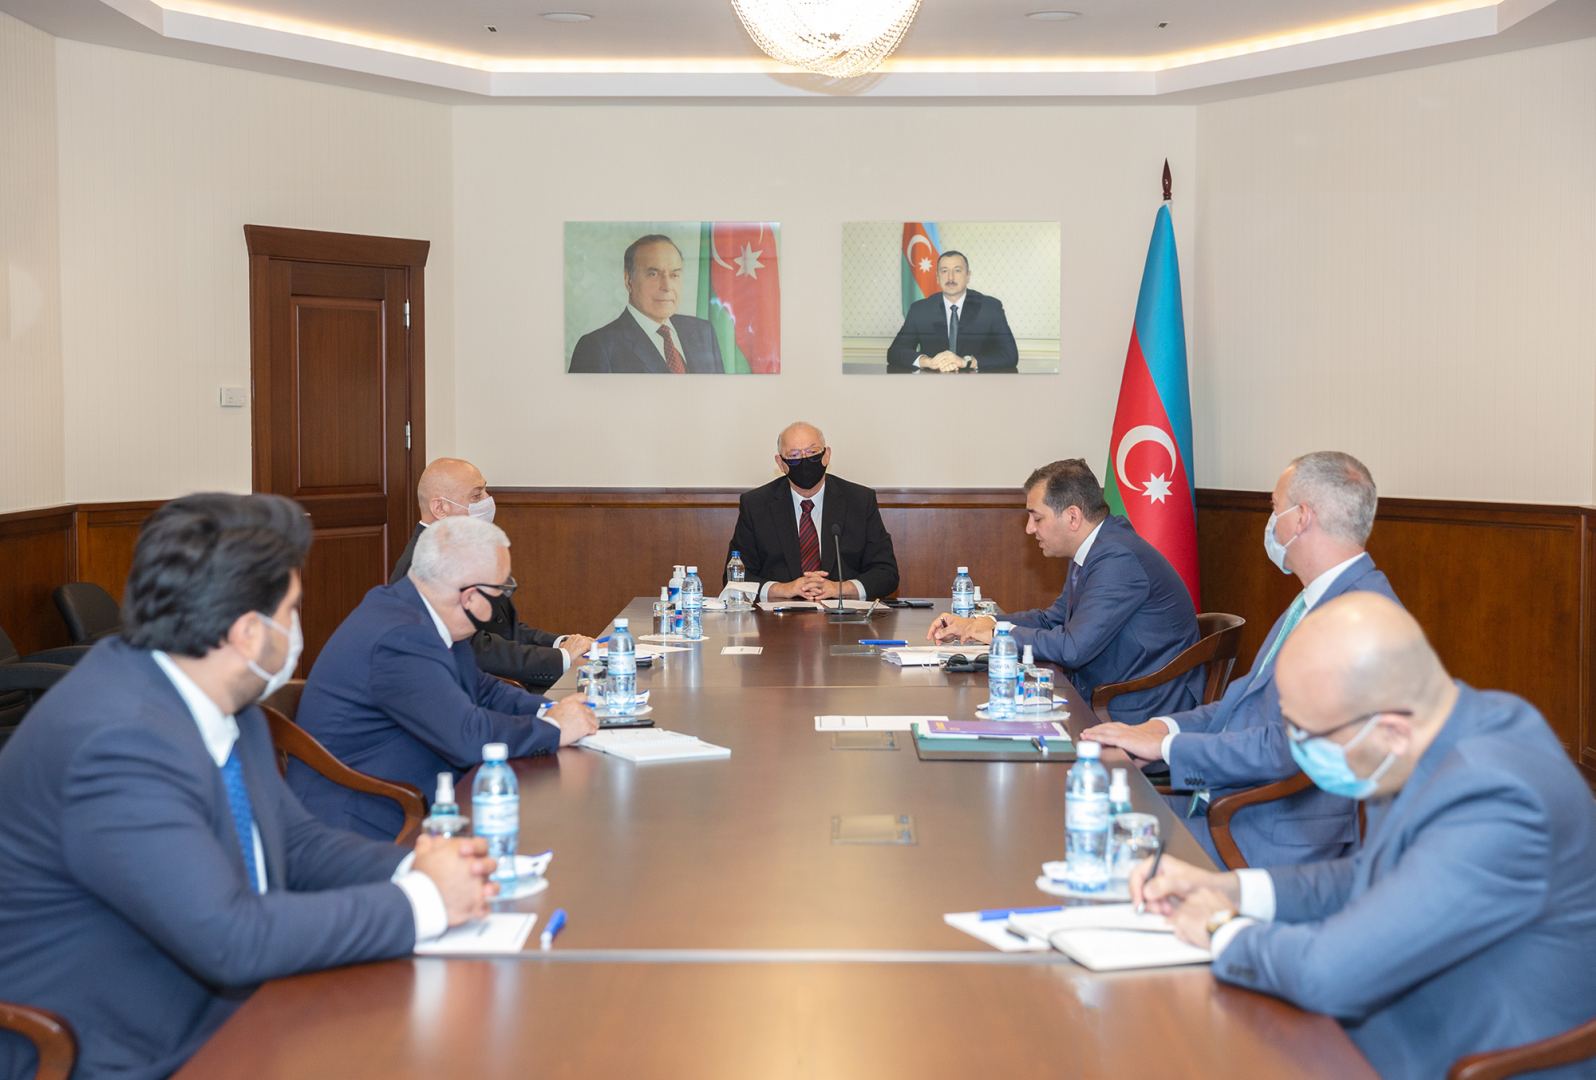 Cooperation of aviation and tourism industries in the time of pandemic discussed in Baku (PHOTO)